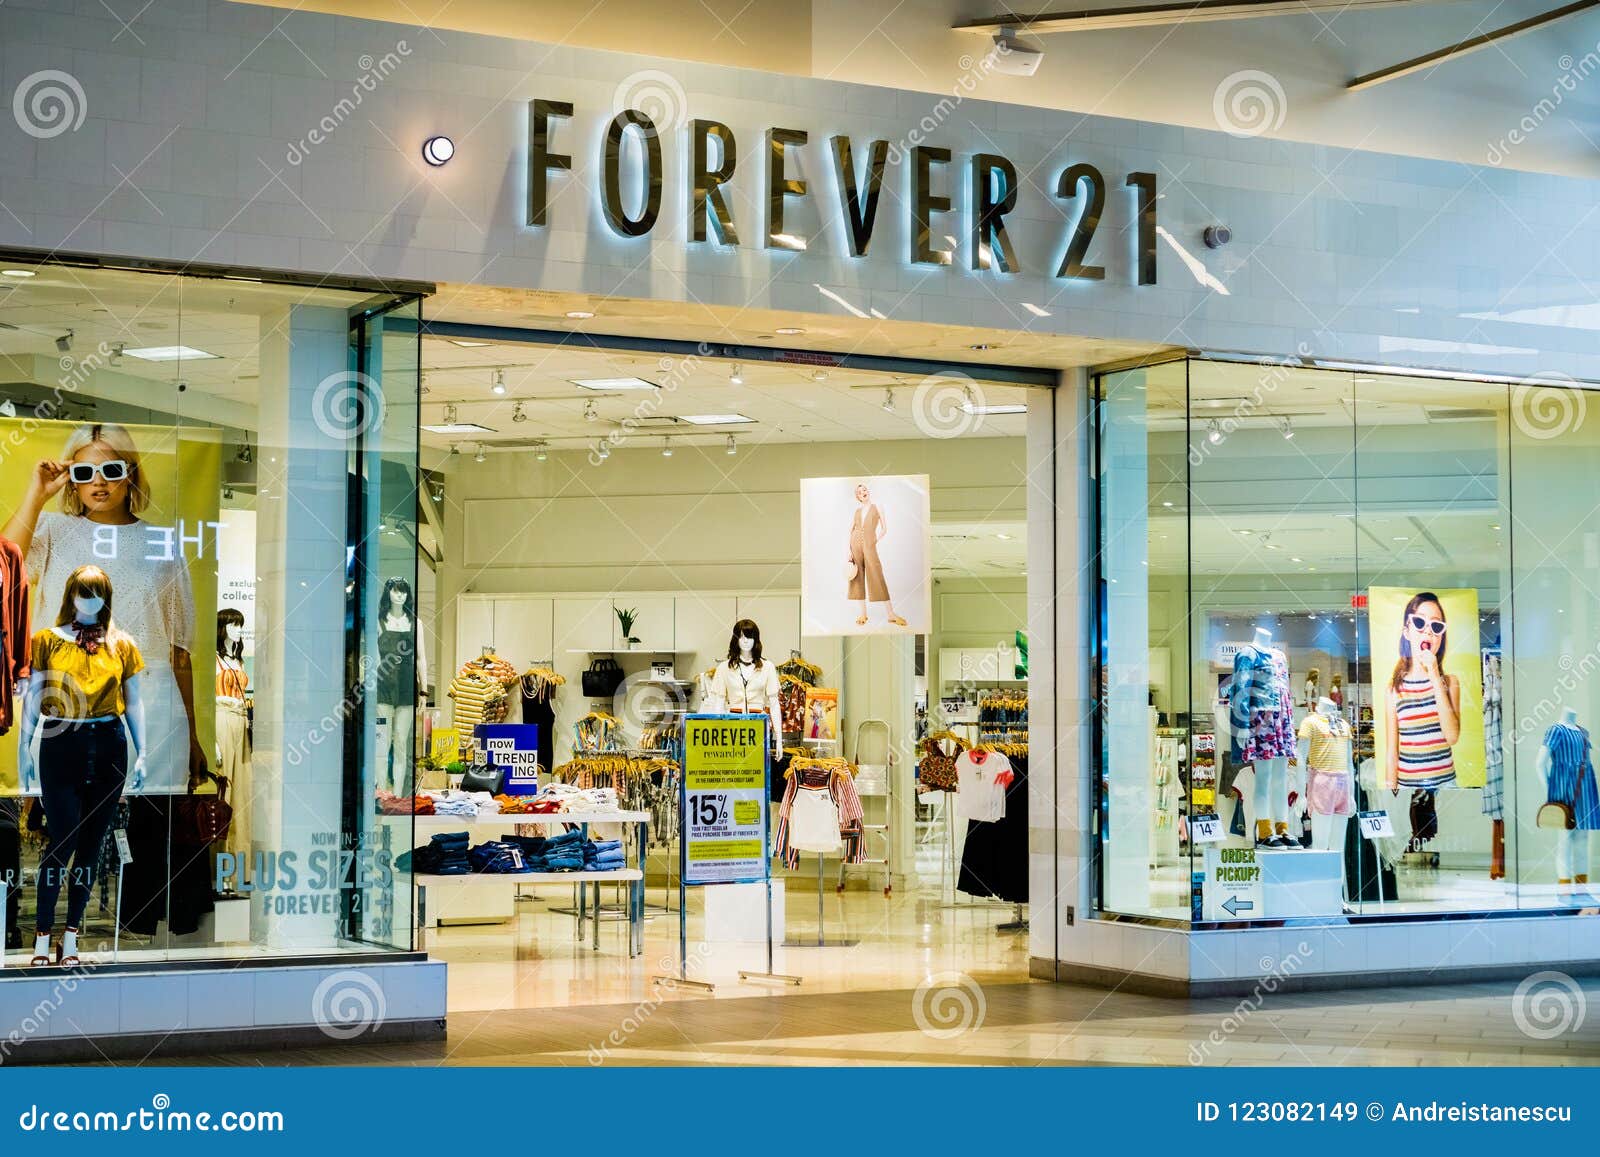 FOREVER 21 * SHOP WITH ME 2020 